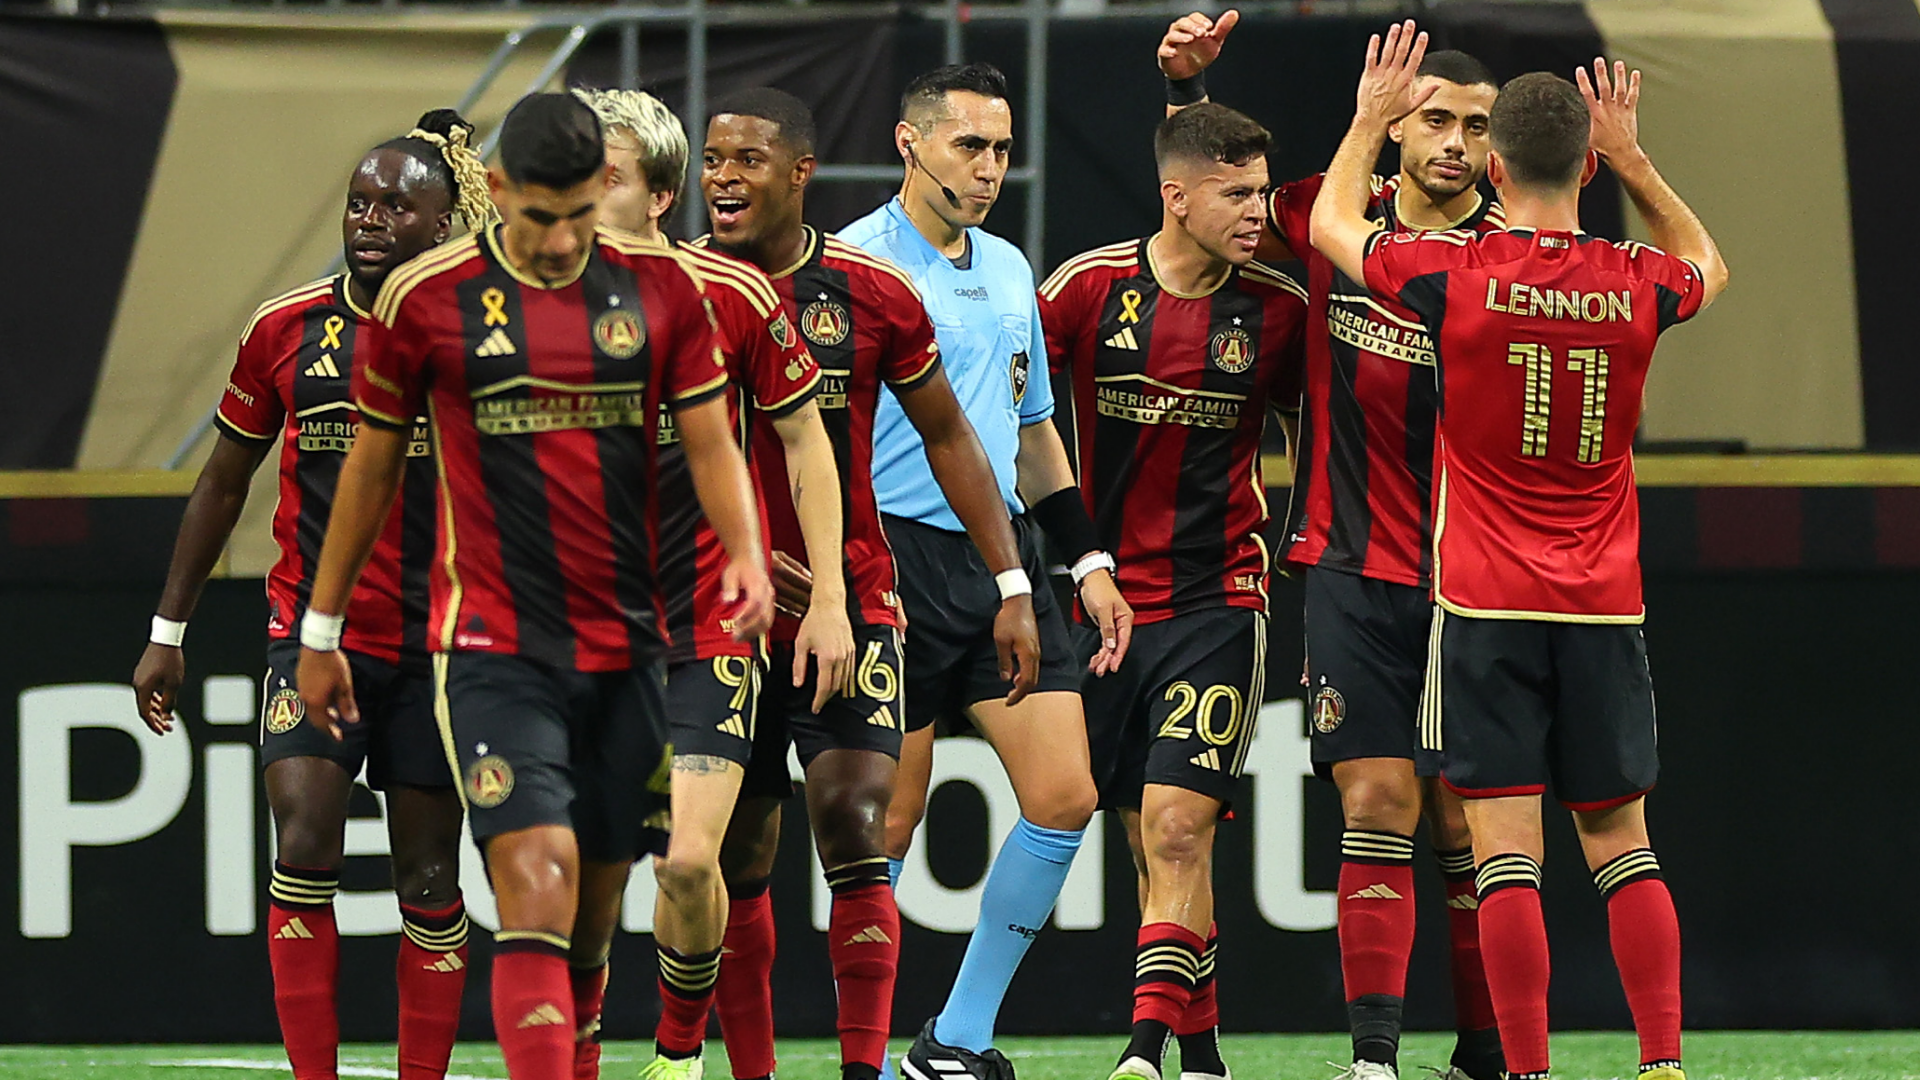 Philadelphia Union vs Atlanta United Live stream, TV channel, kick-off time and where to watch Goal South Africa